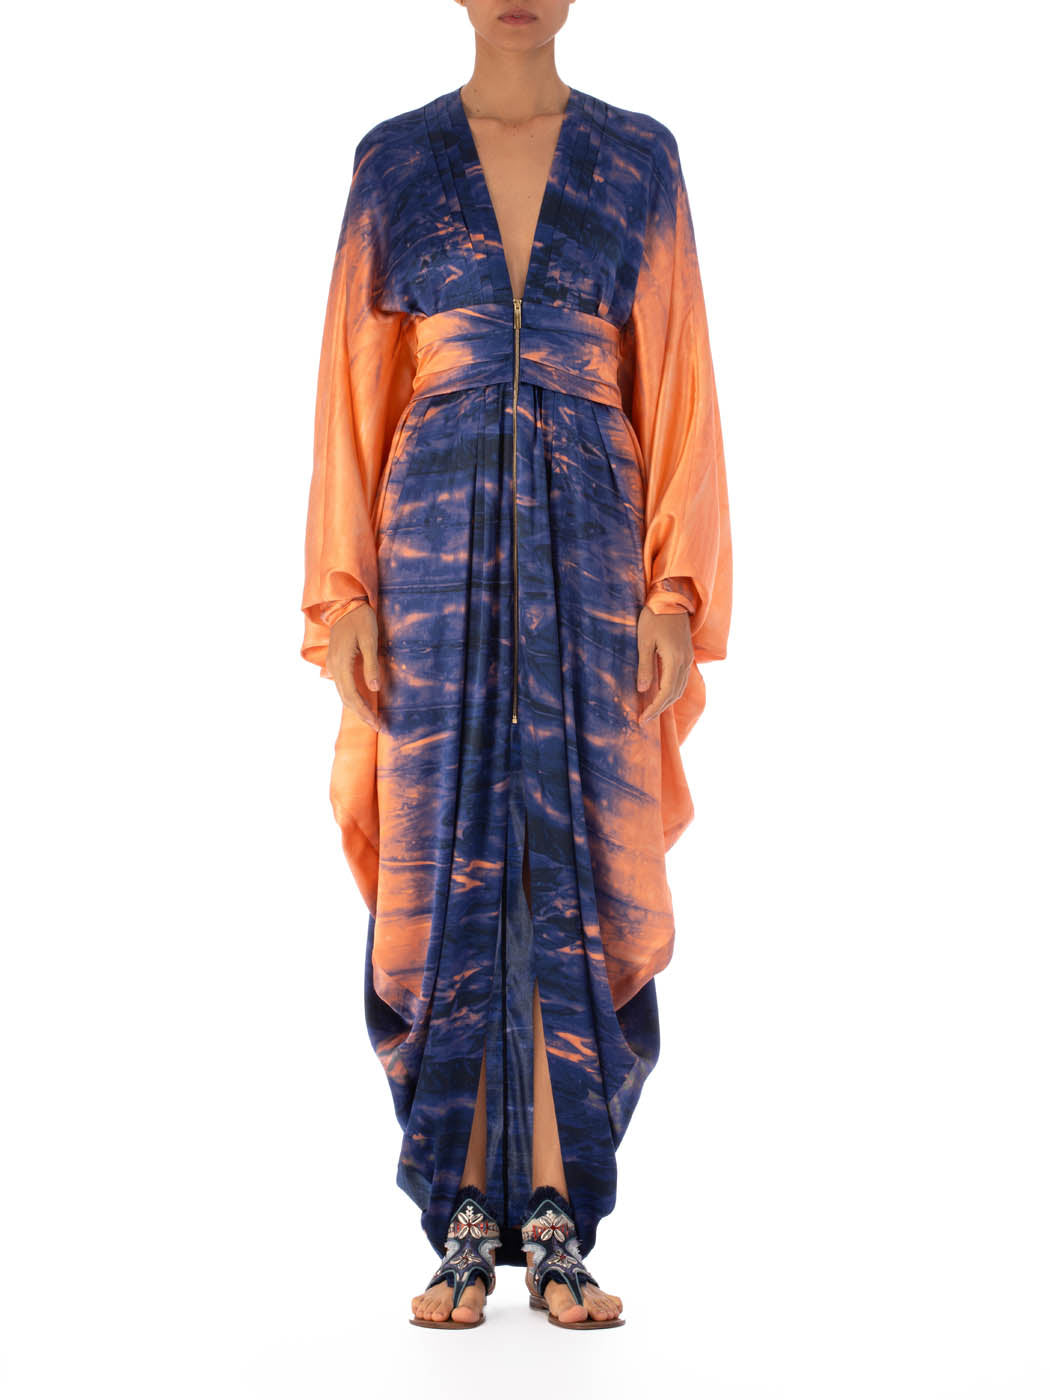 A long, flowing Danette Dress Mediterranean Coral Blue with blue and orange tie-dye patterns, displayed against a white background.